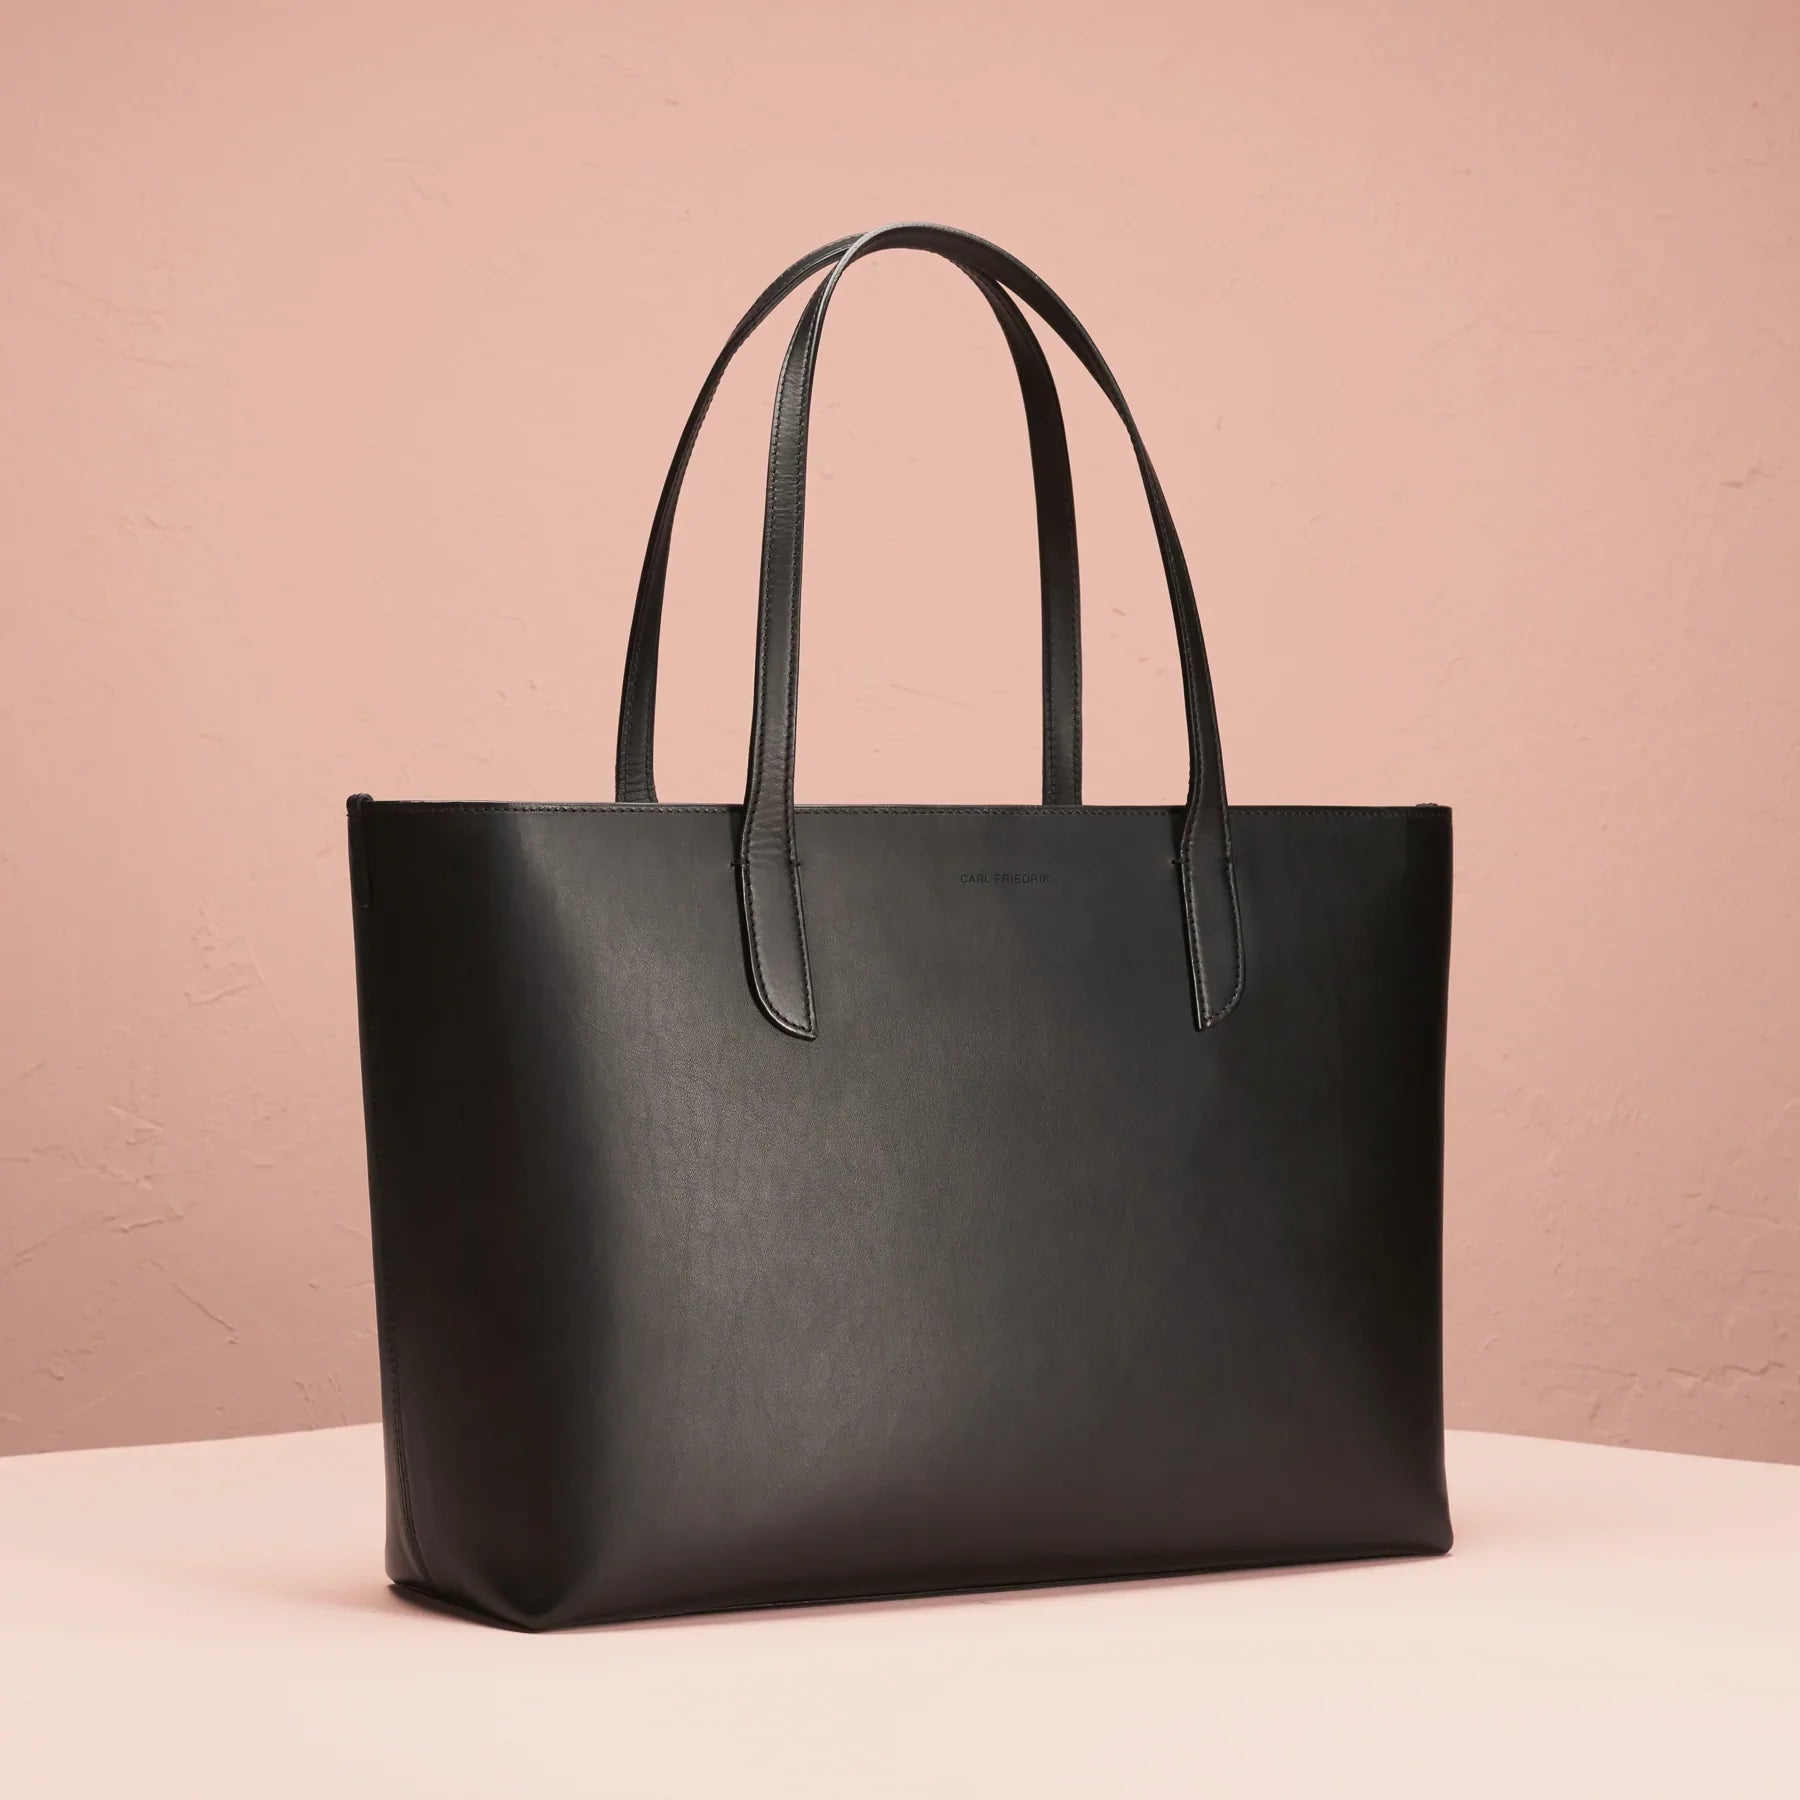 Ashby - Return Black / grey Women's leather tote - Fair condition